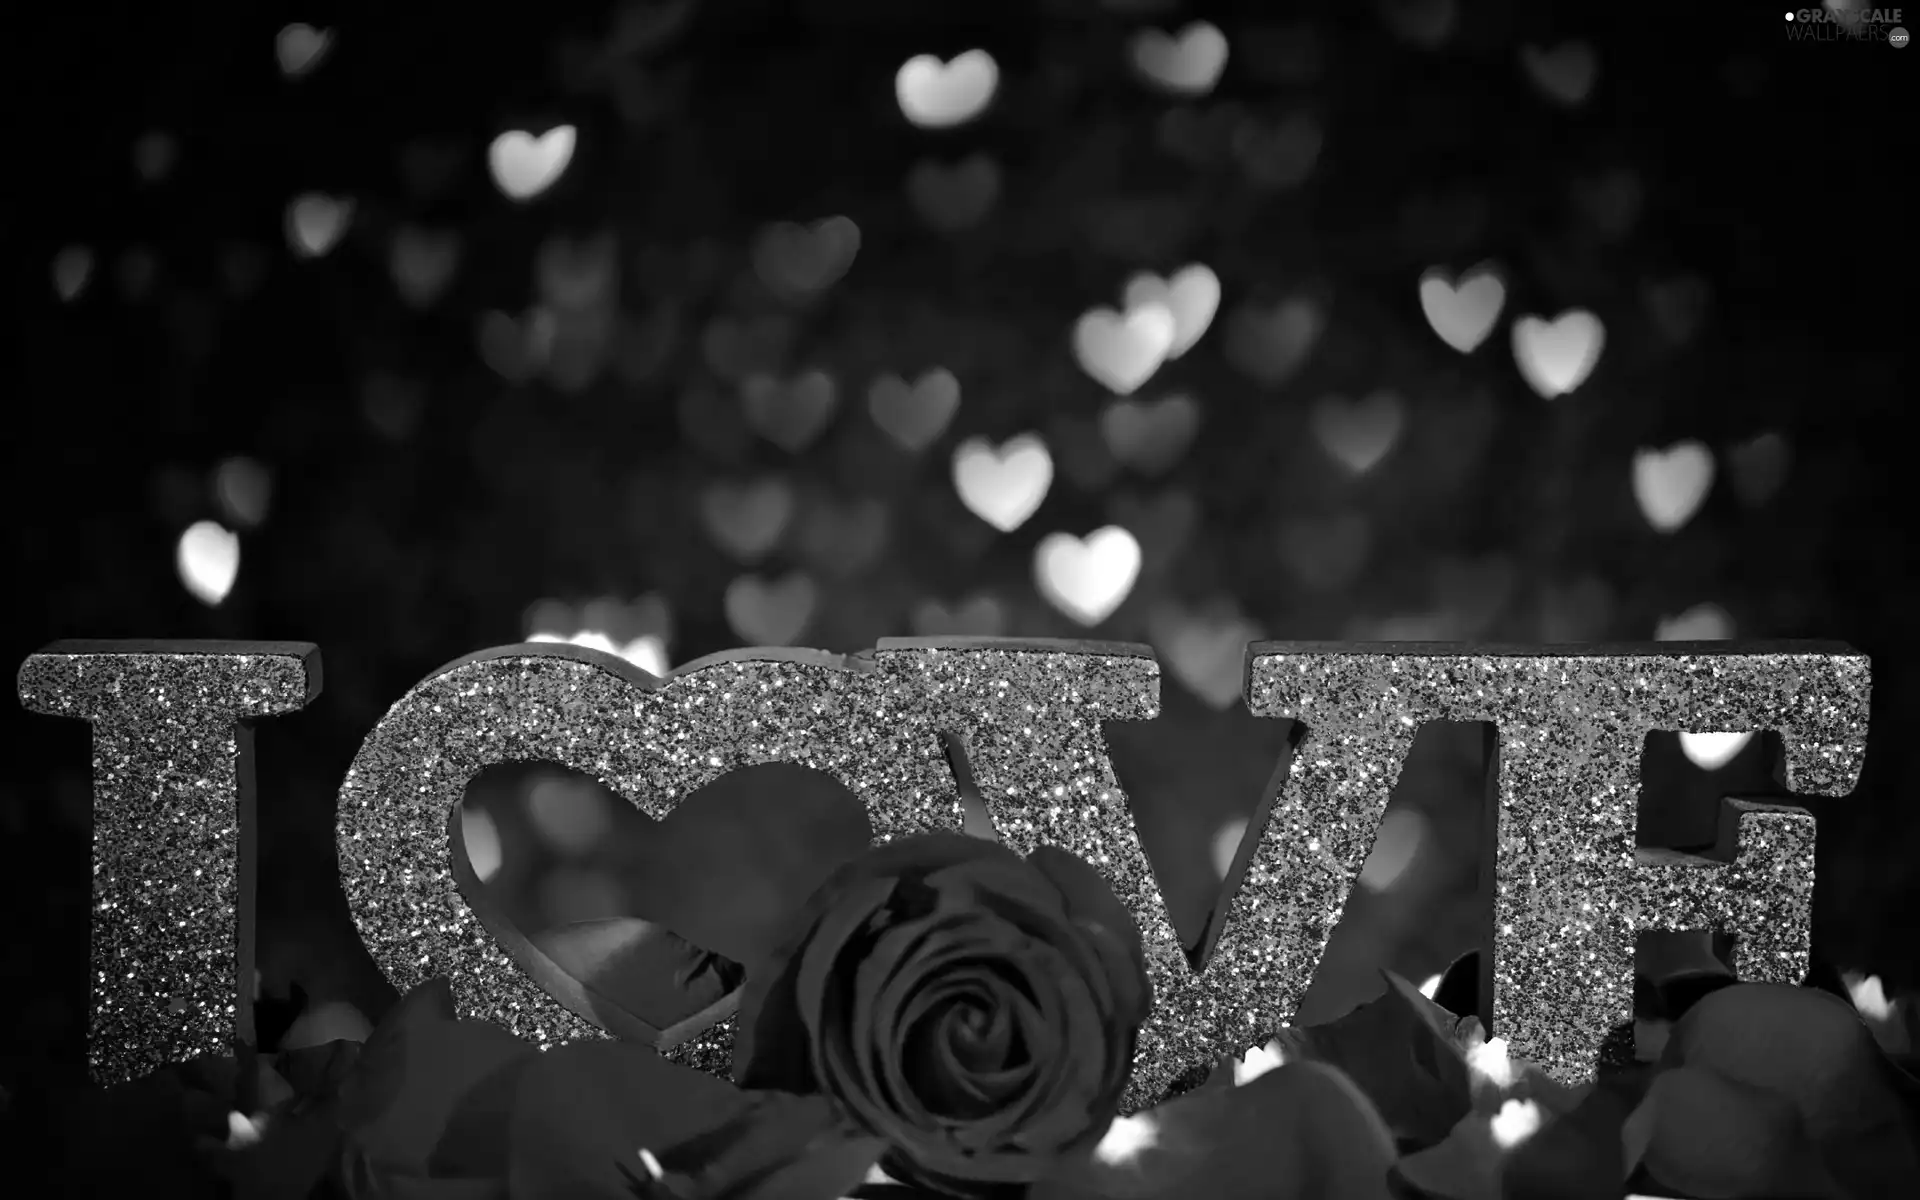 text, hearts, flakes, roses